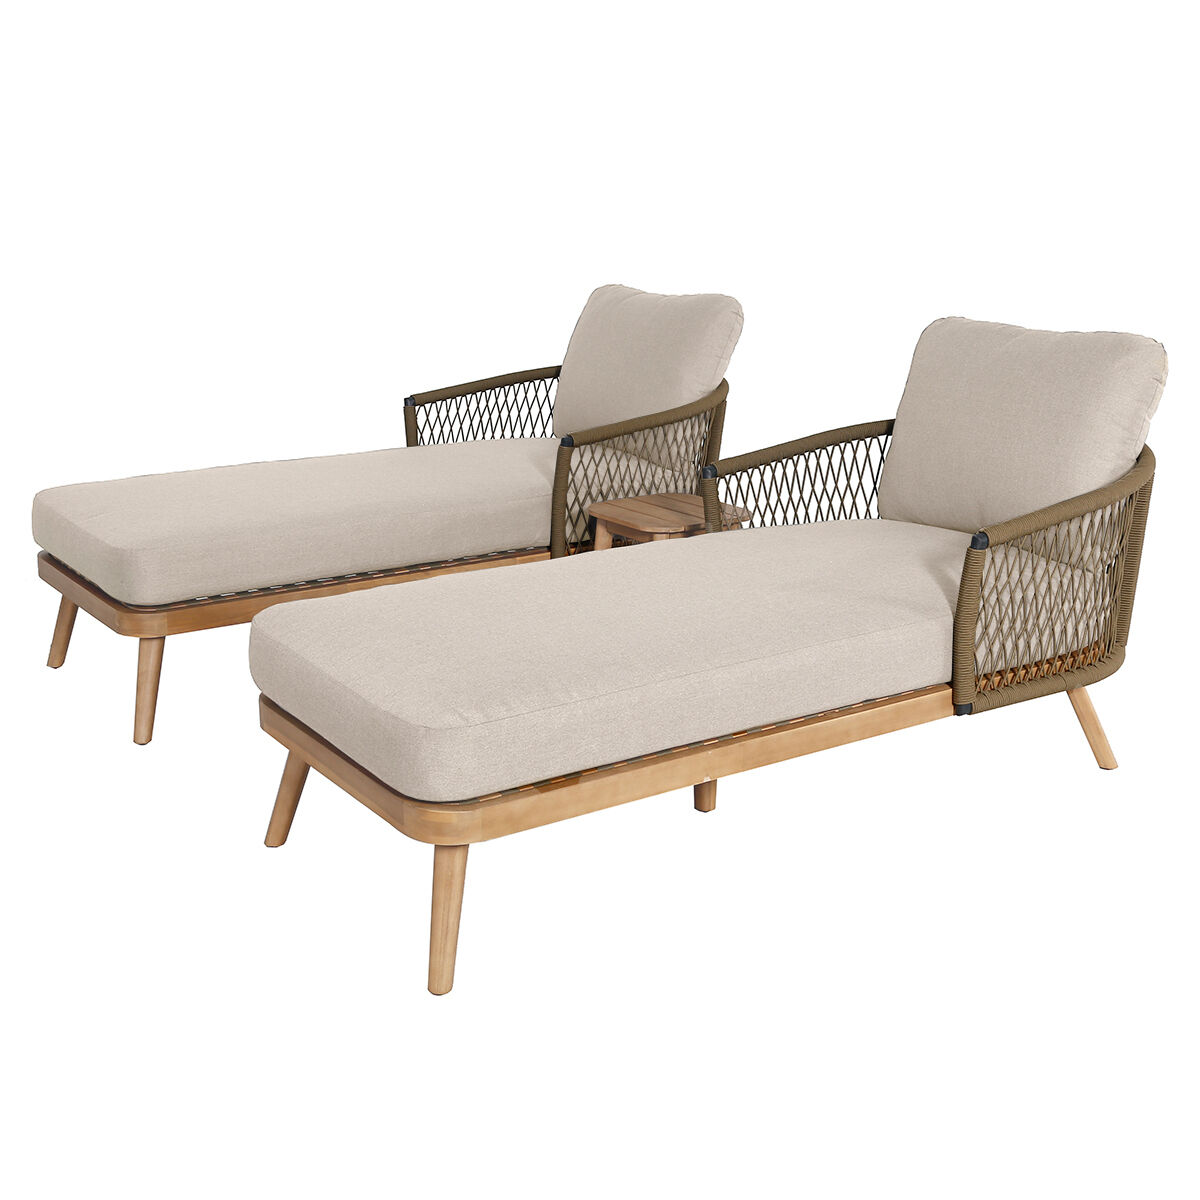 Maze - Bali Rope Weave Double Sunlounger Set product image